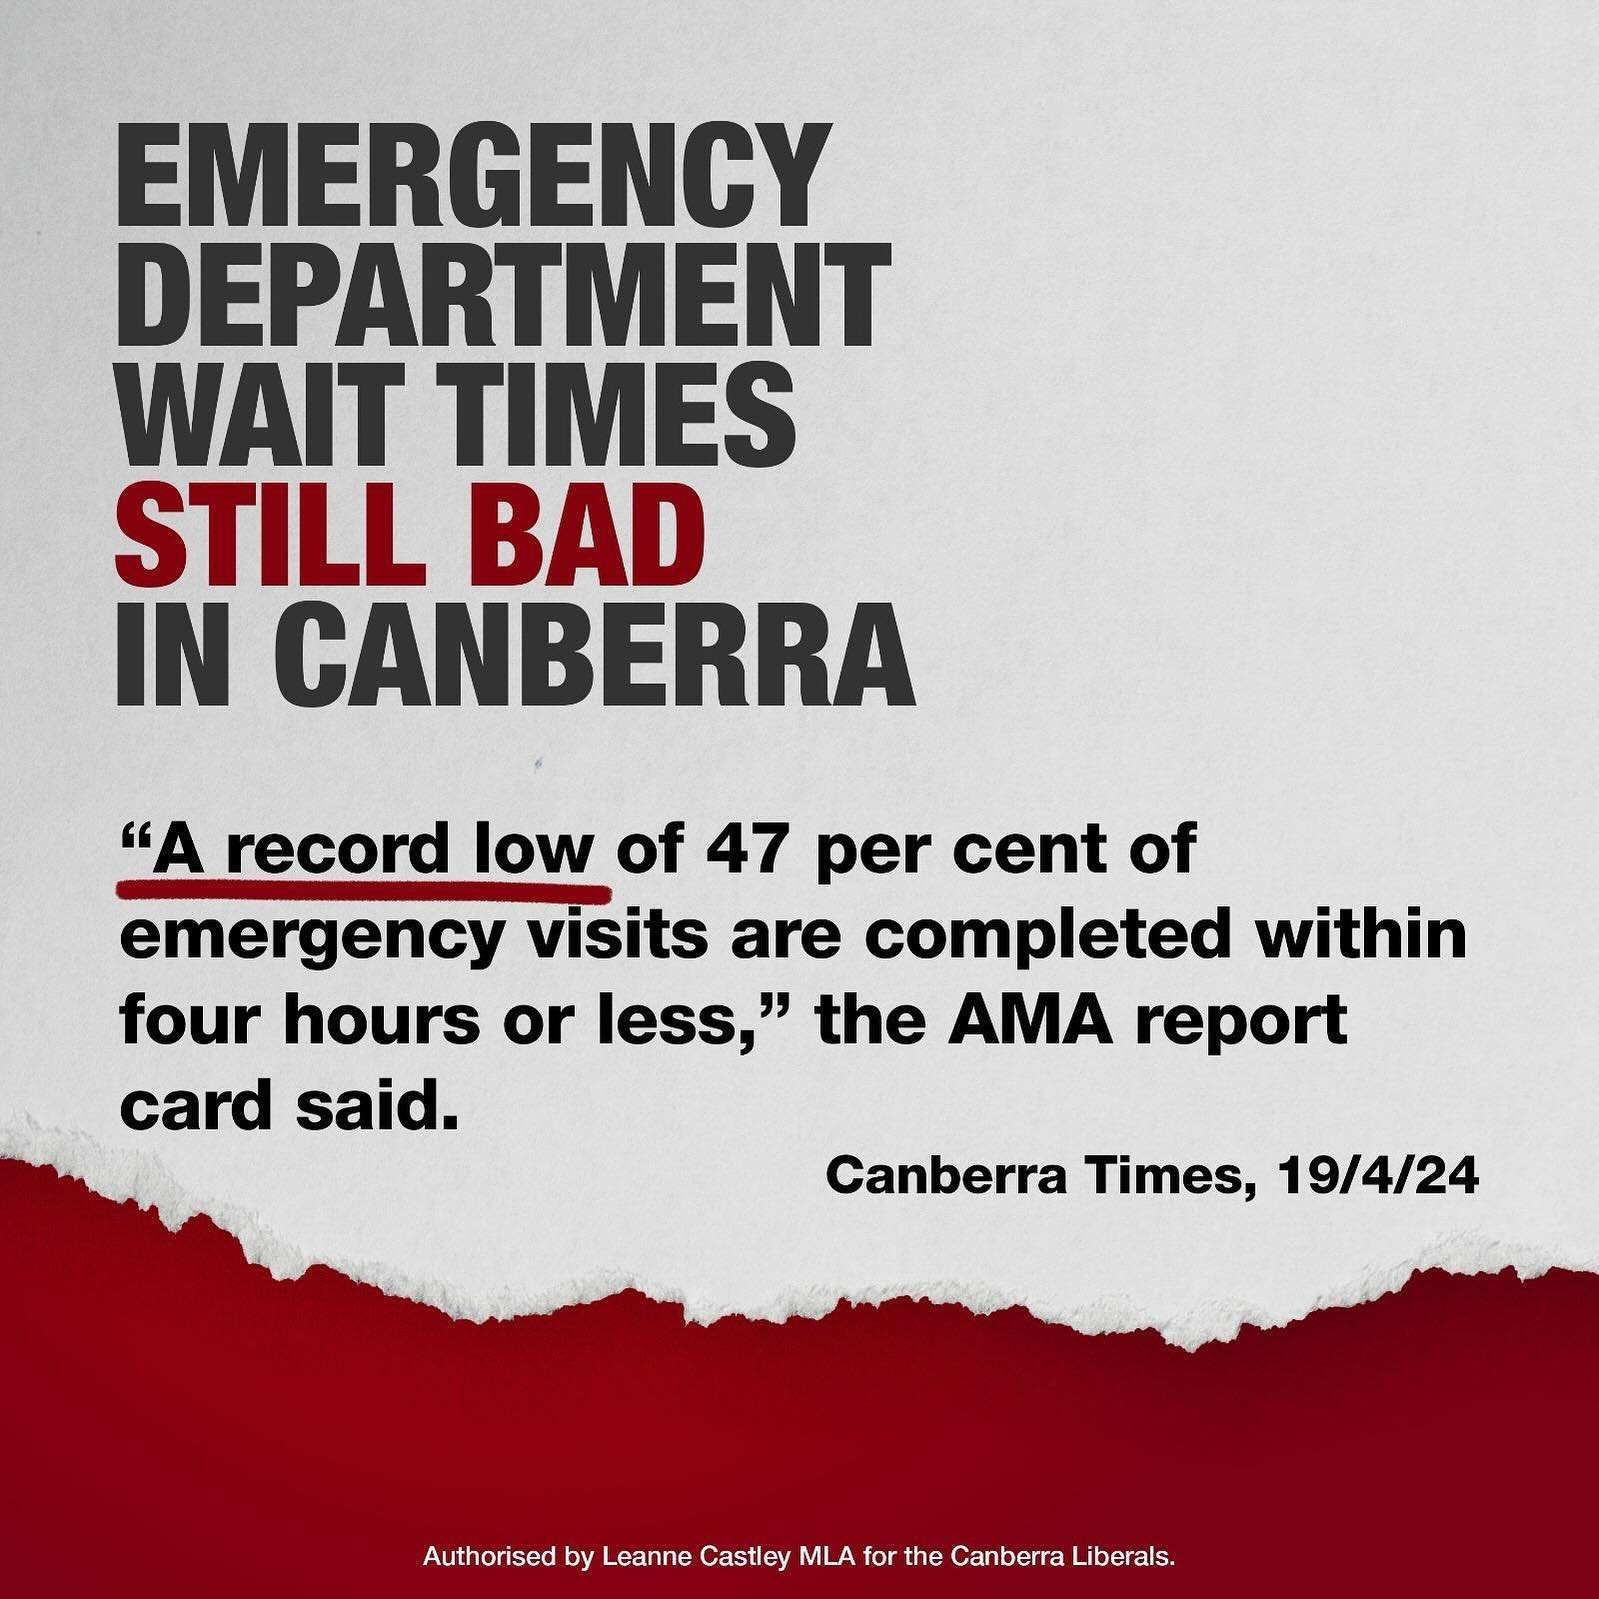 Labor and the Greens have overseen a spectacular failure in our health system over their two decades in government.

Our nurses and doctors deserve respect and support, not a government that has fostered a toxic and blame culture.

In October, you ca